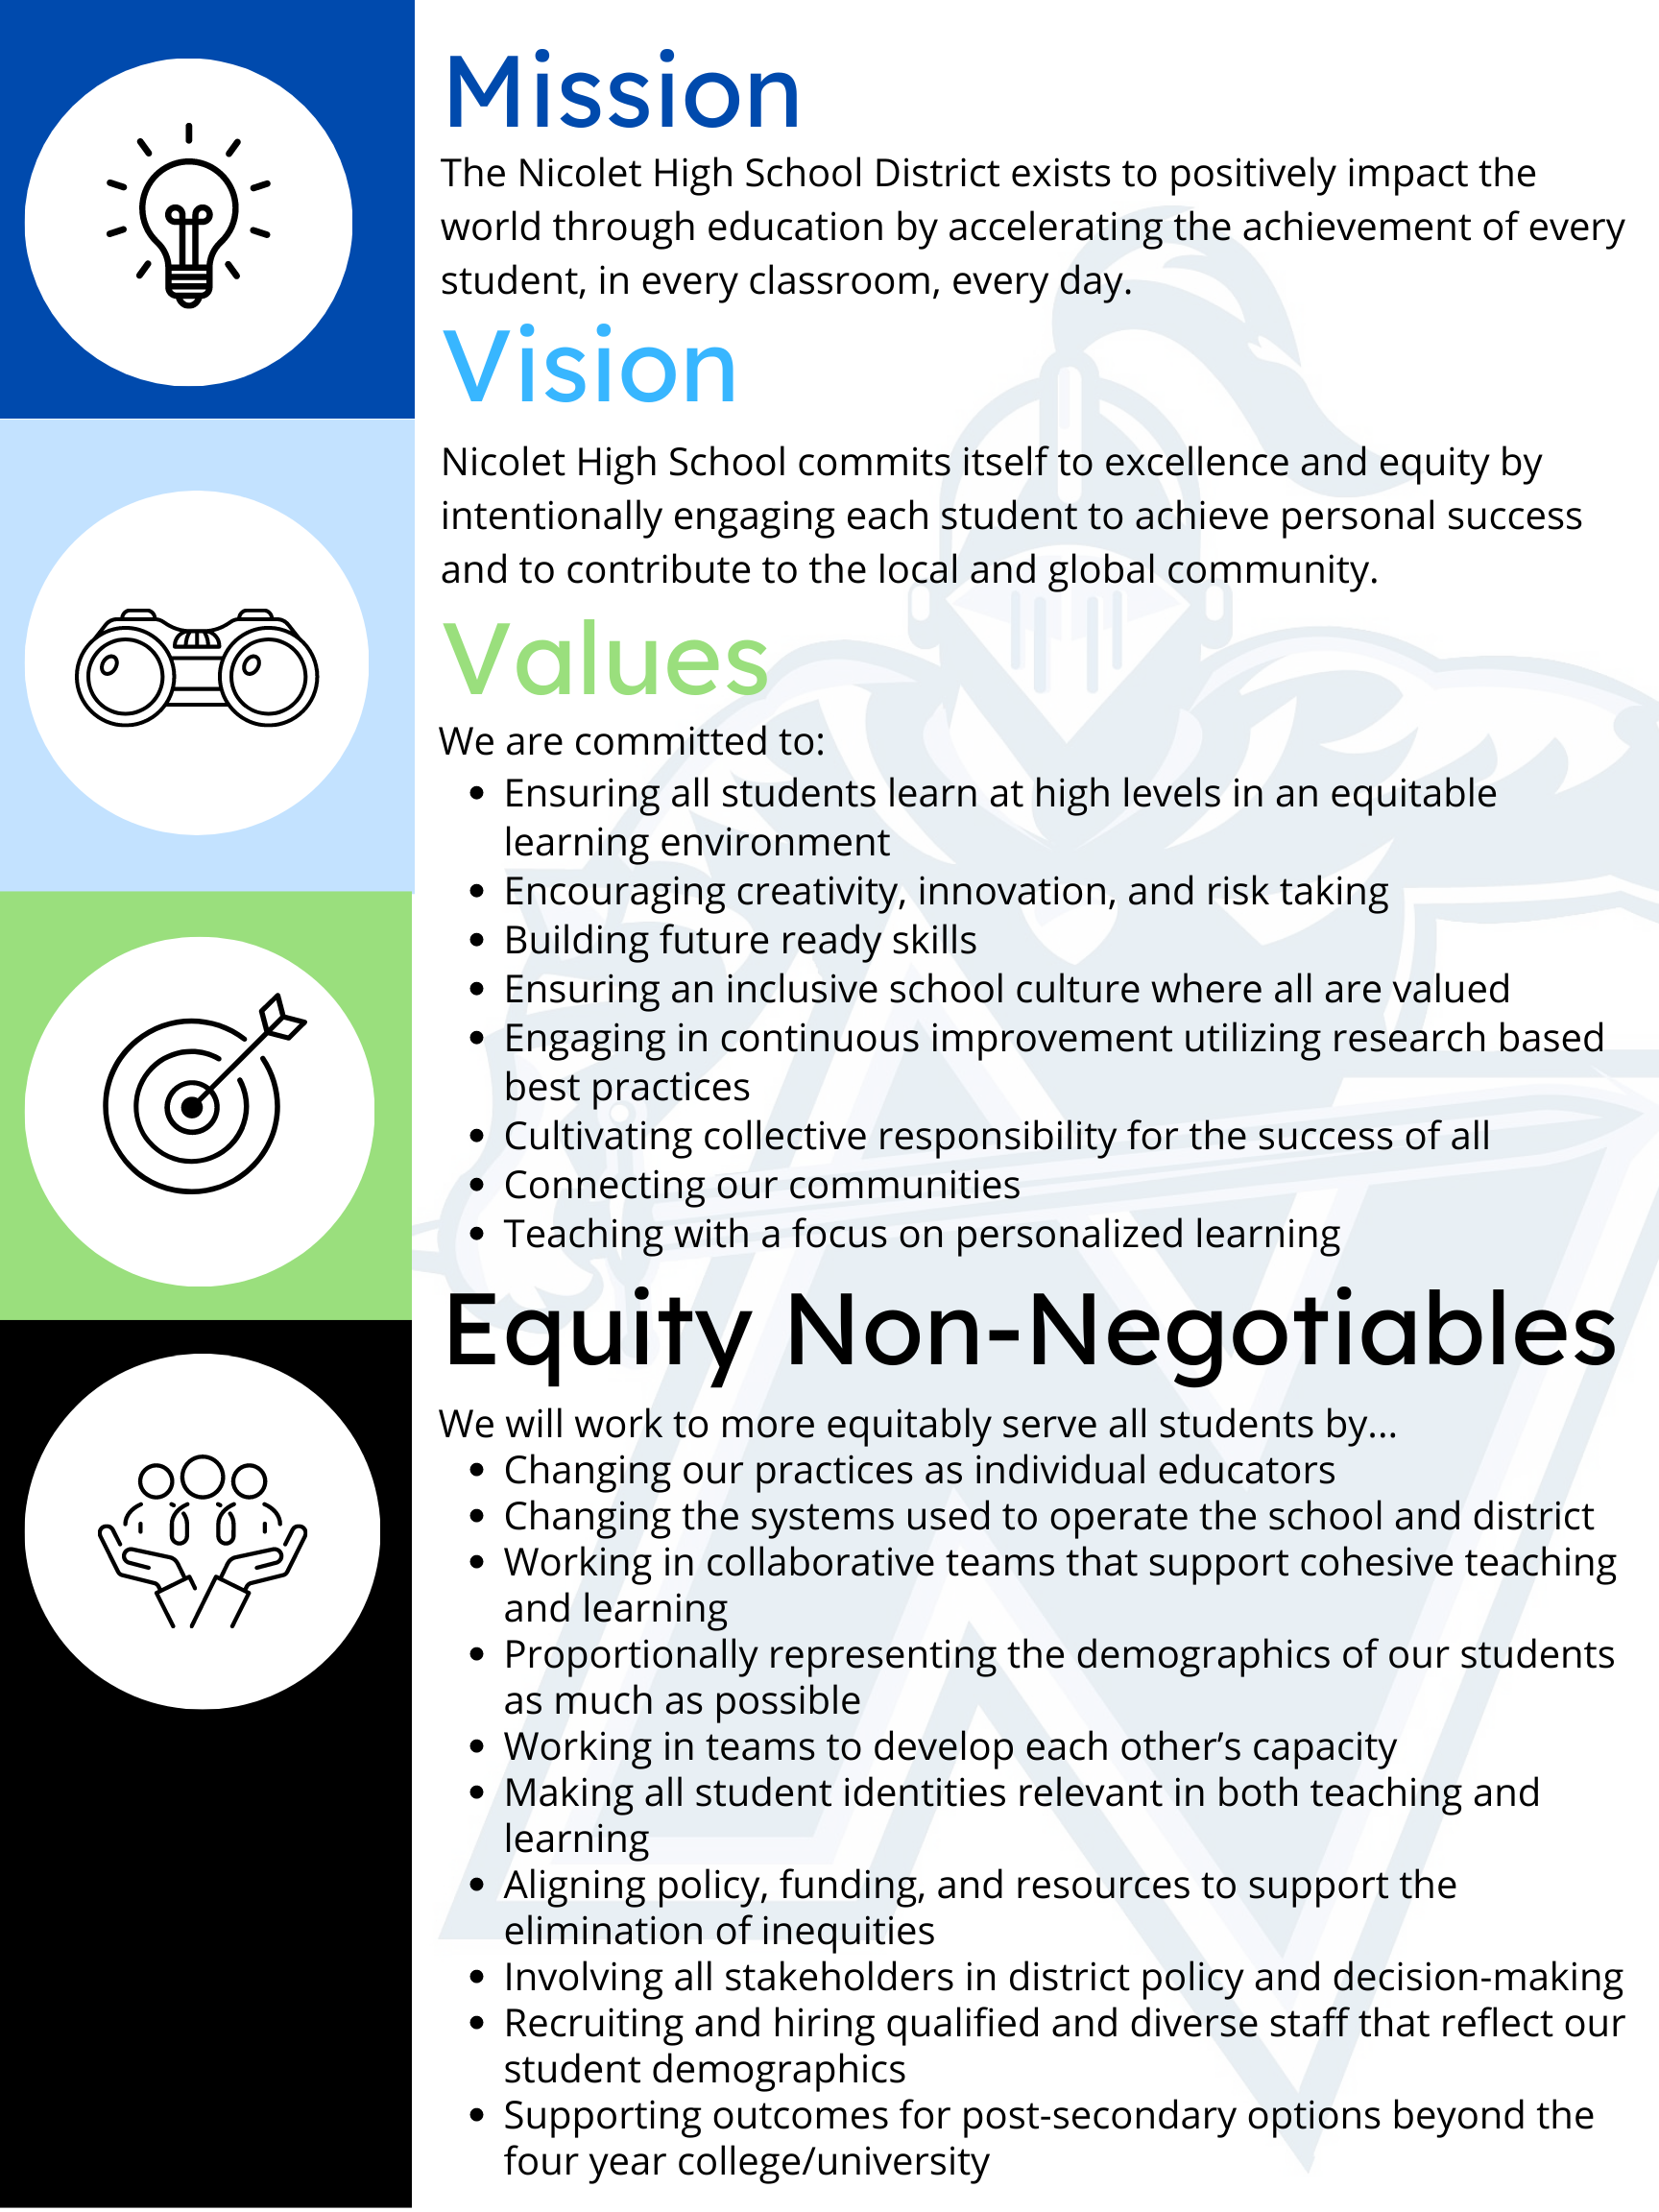 graphic of mission statement - mission,  vision, values, equity non-negotiables